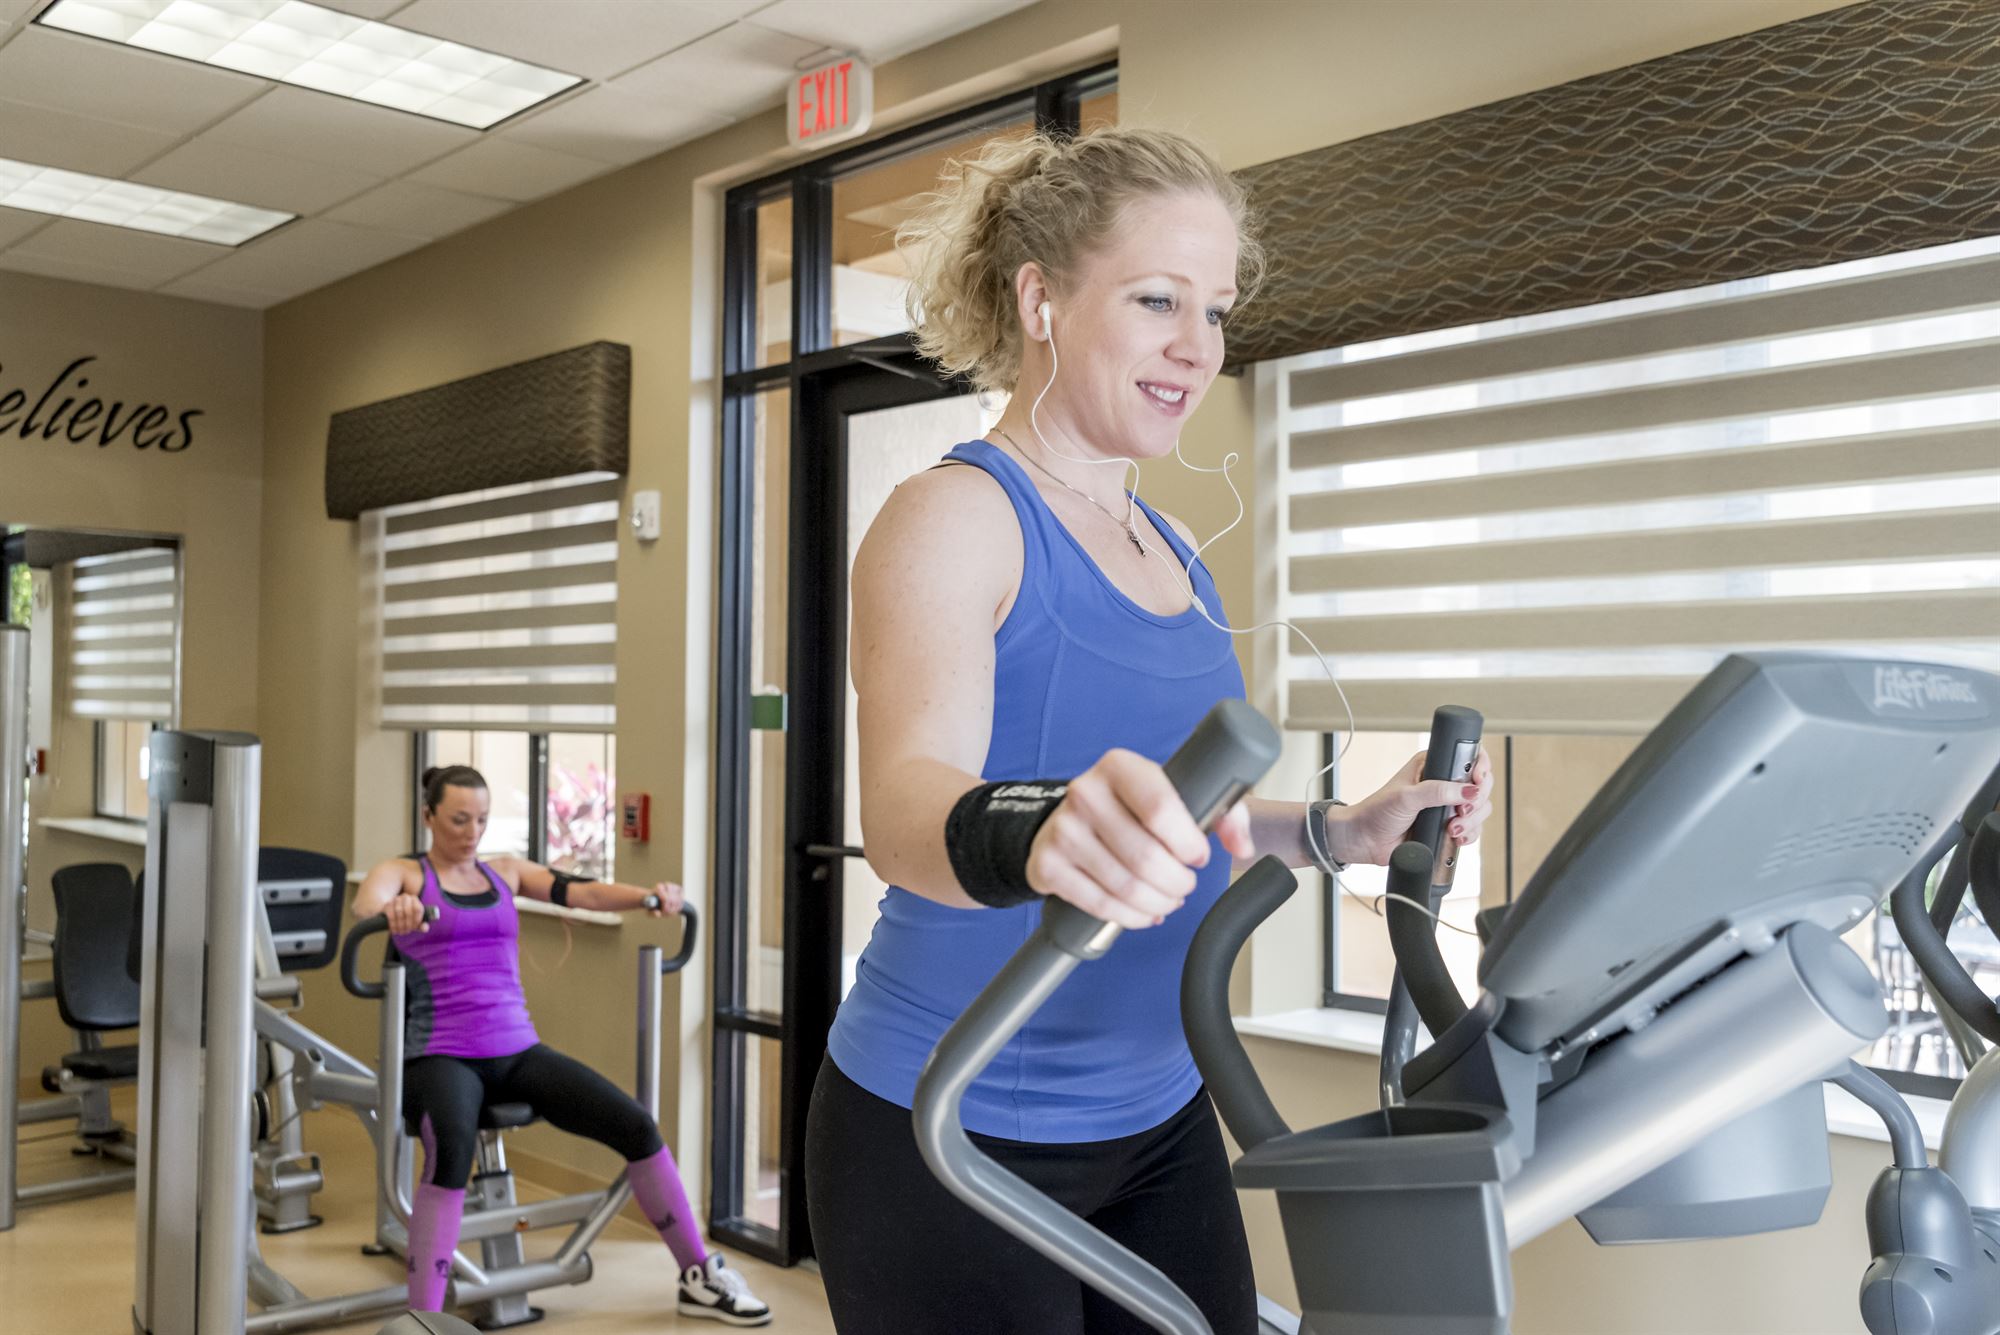 Guest working out at our Orlando resort onsite fitness center